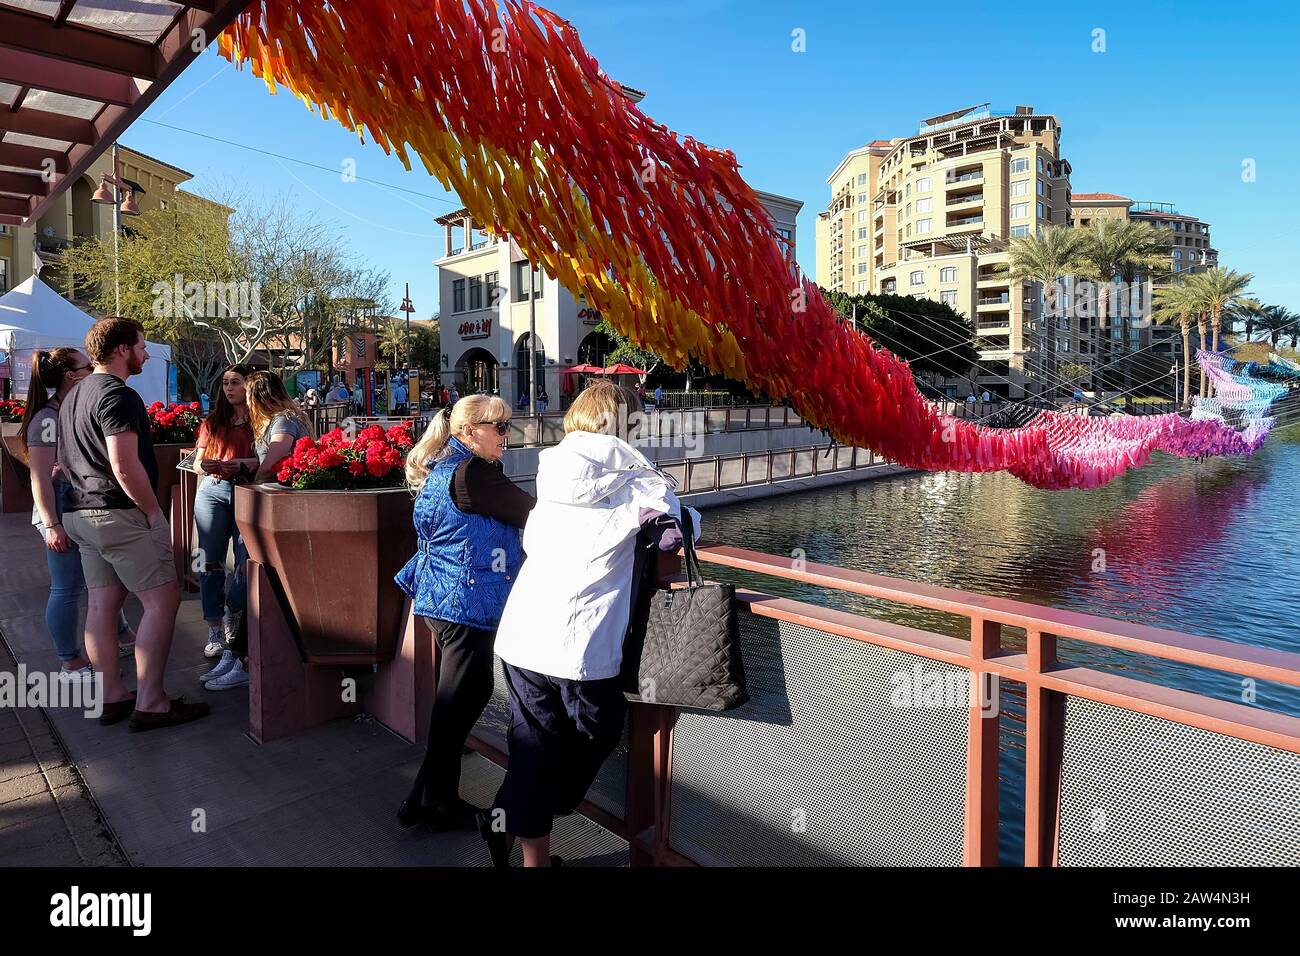 Downtown Scottsdale, Arizona. People sightseeing at the Canal Convergence.public art event. Stock Photo